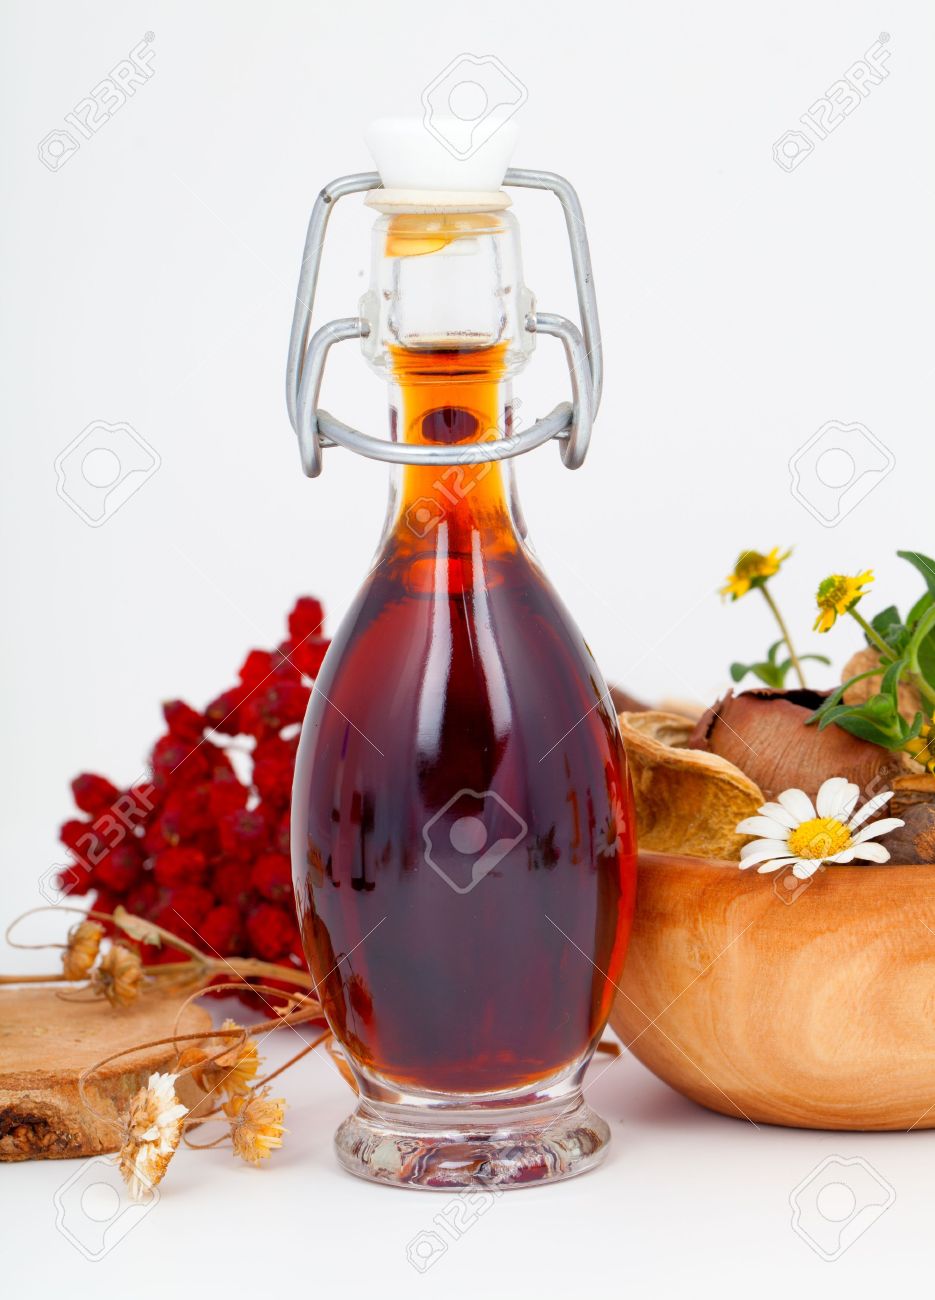 14732699-mixture-syrup-with-rowan-berries-and-herb-on-white-background--Stock-Photo